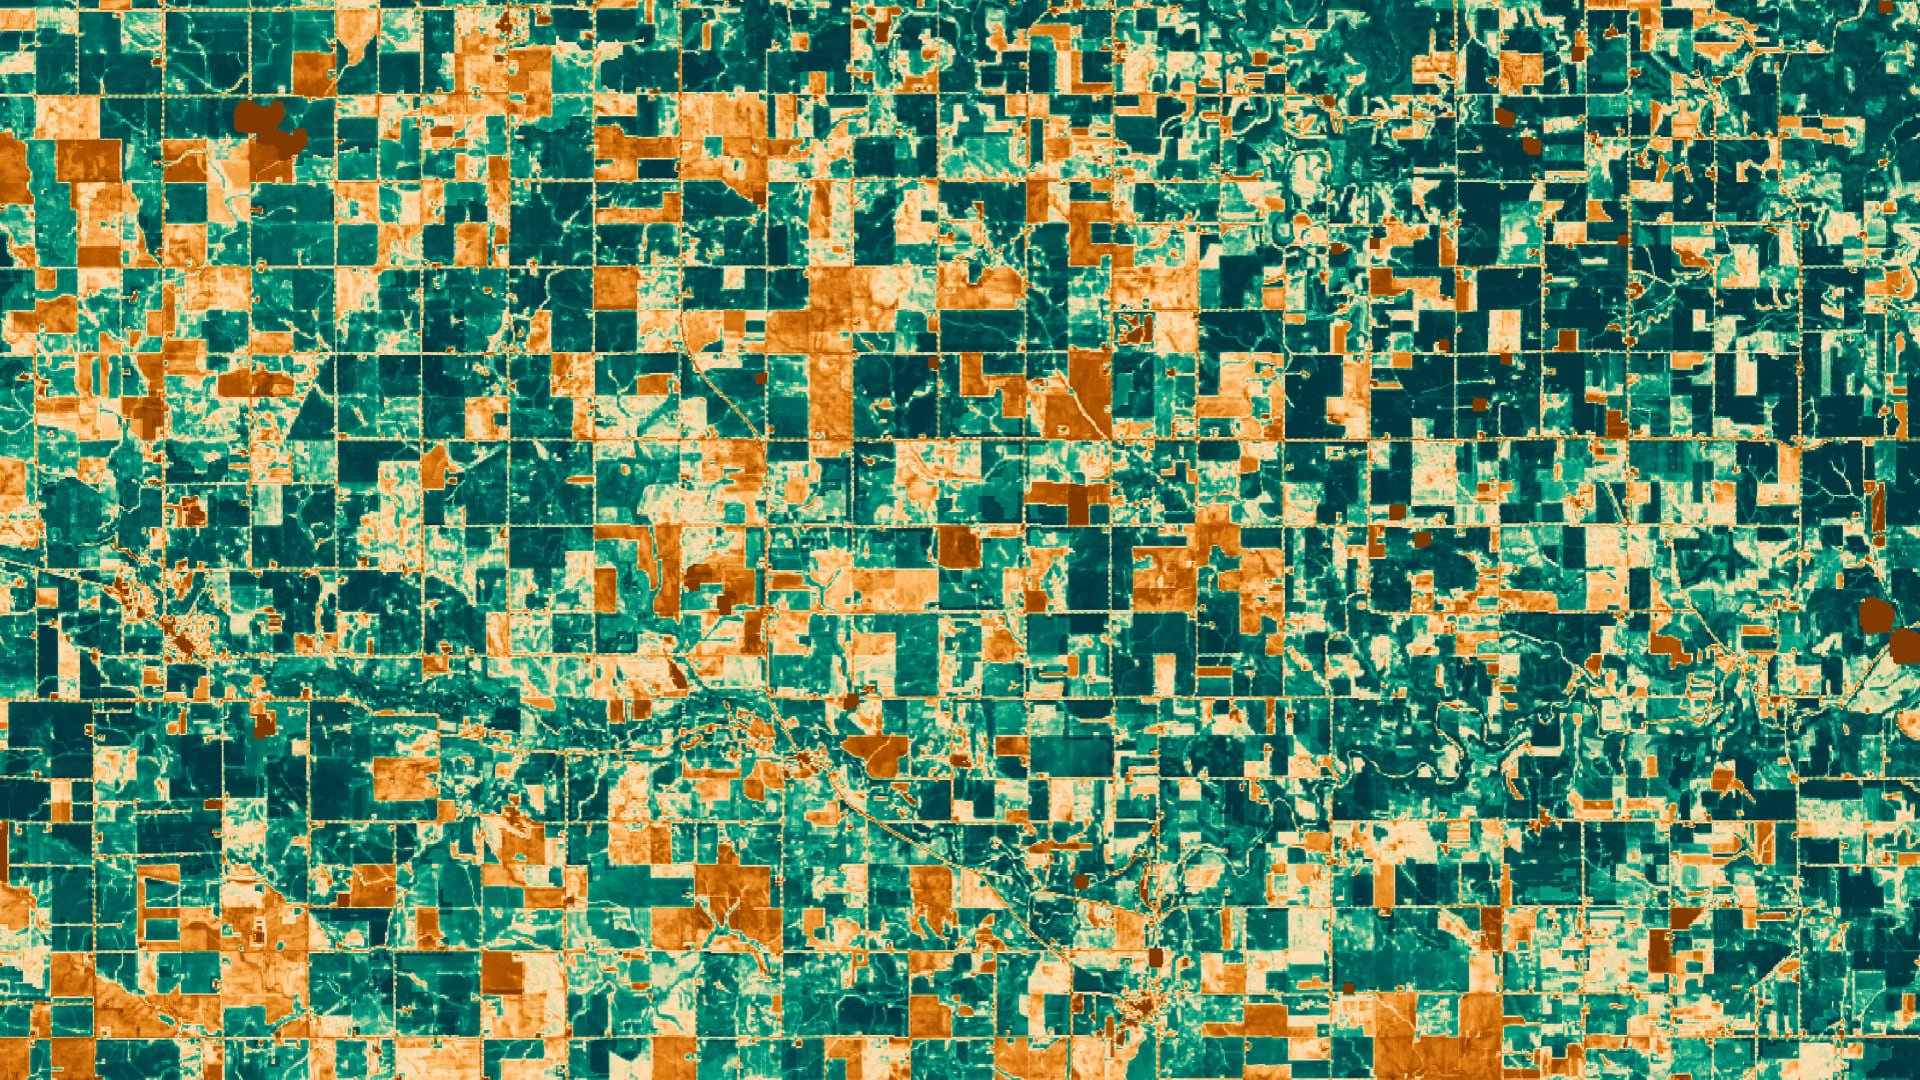 Midwest Agriculture II